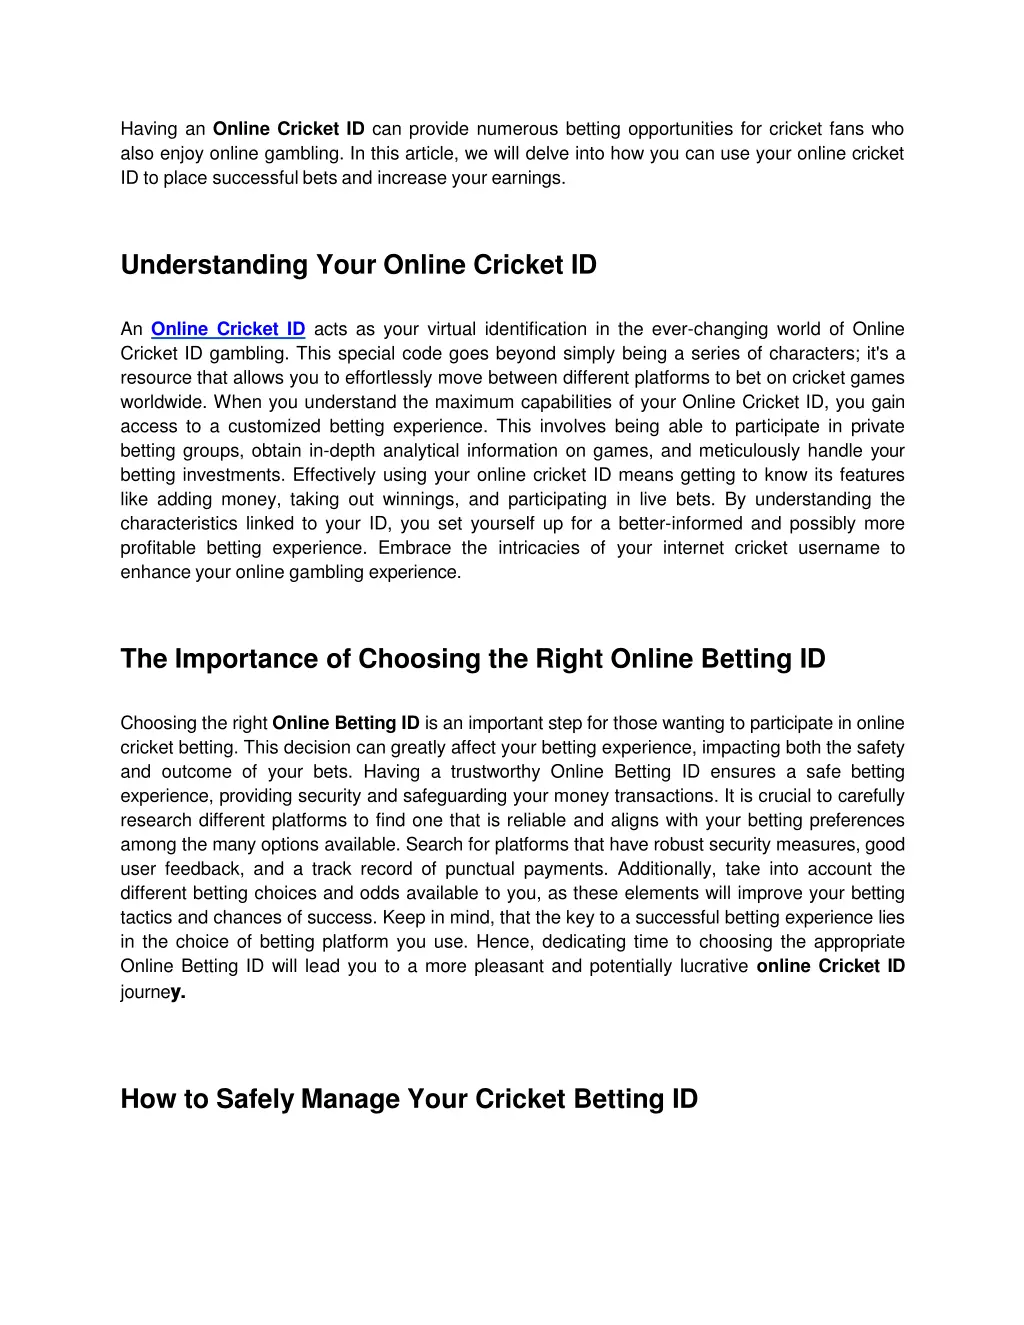 having an online cricket id can provide numerous